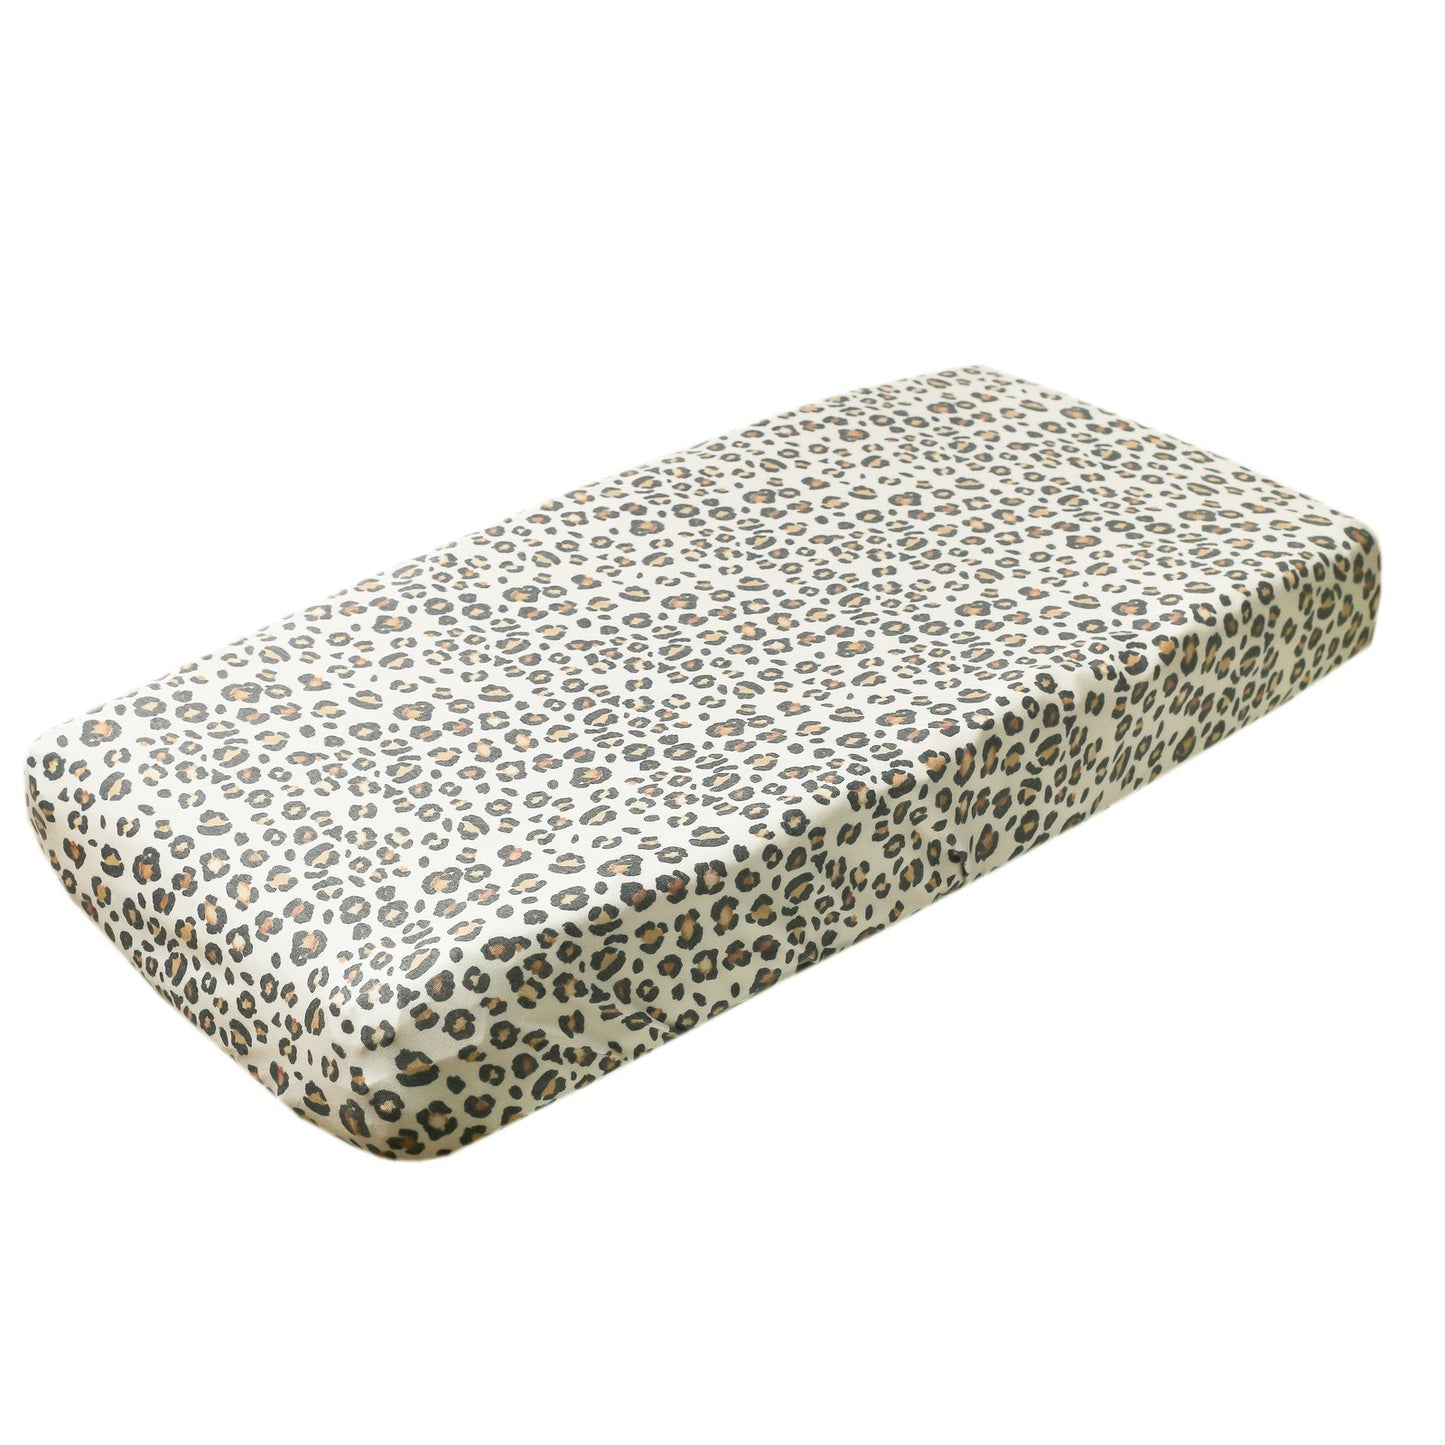 COPPER PEARL CHANGING PAD/ZARA